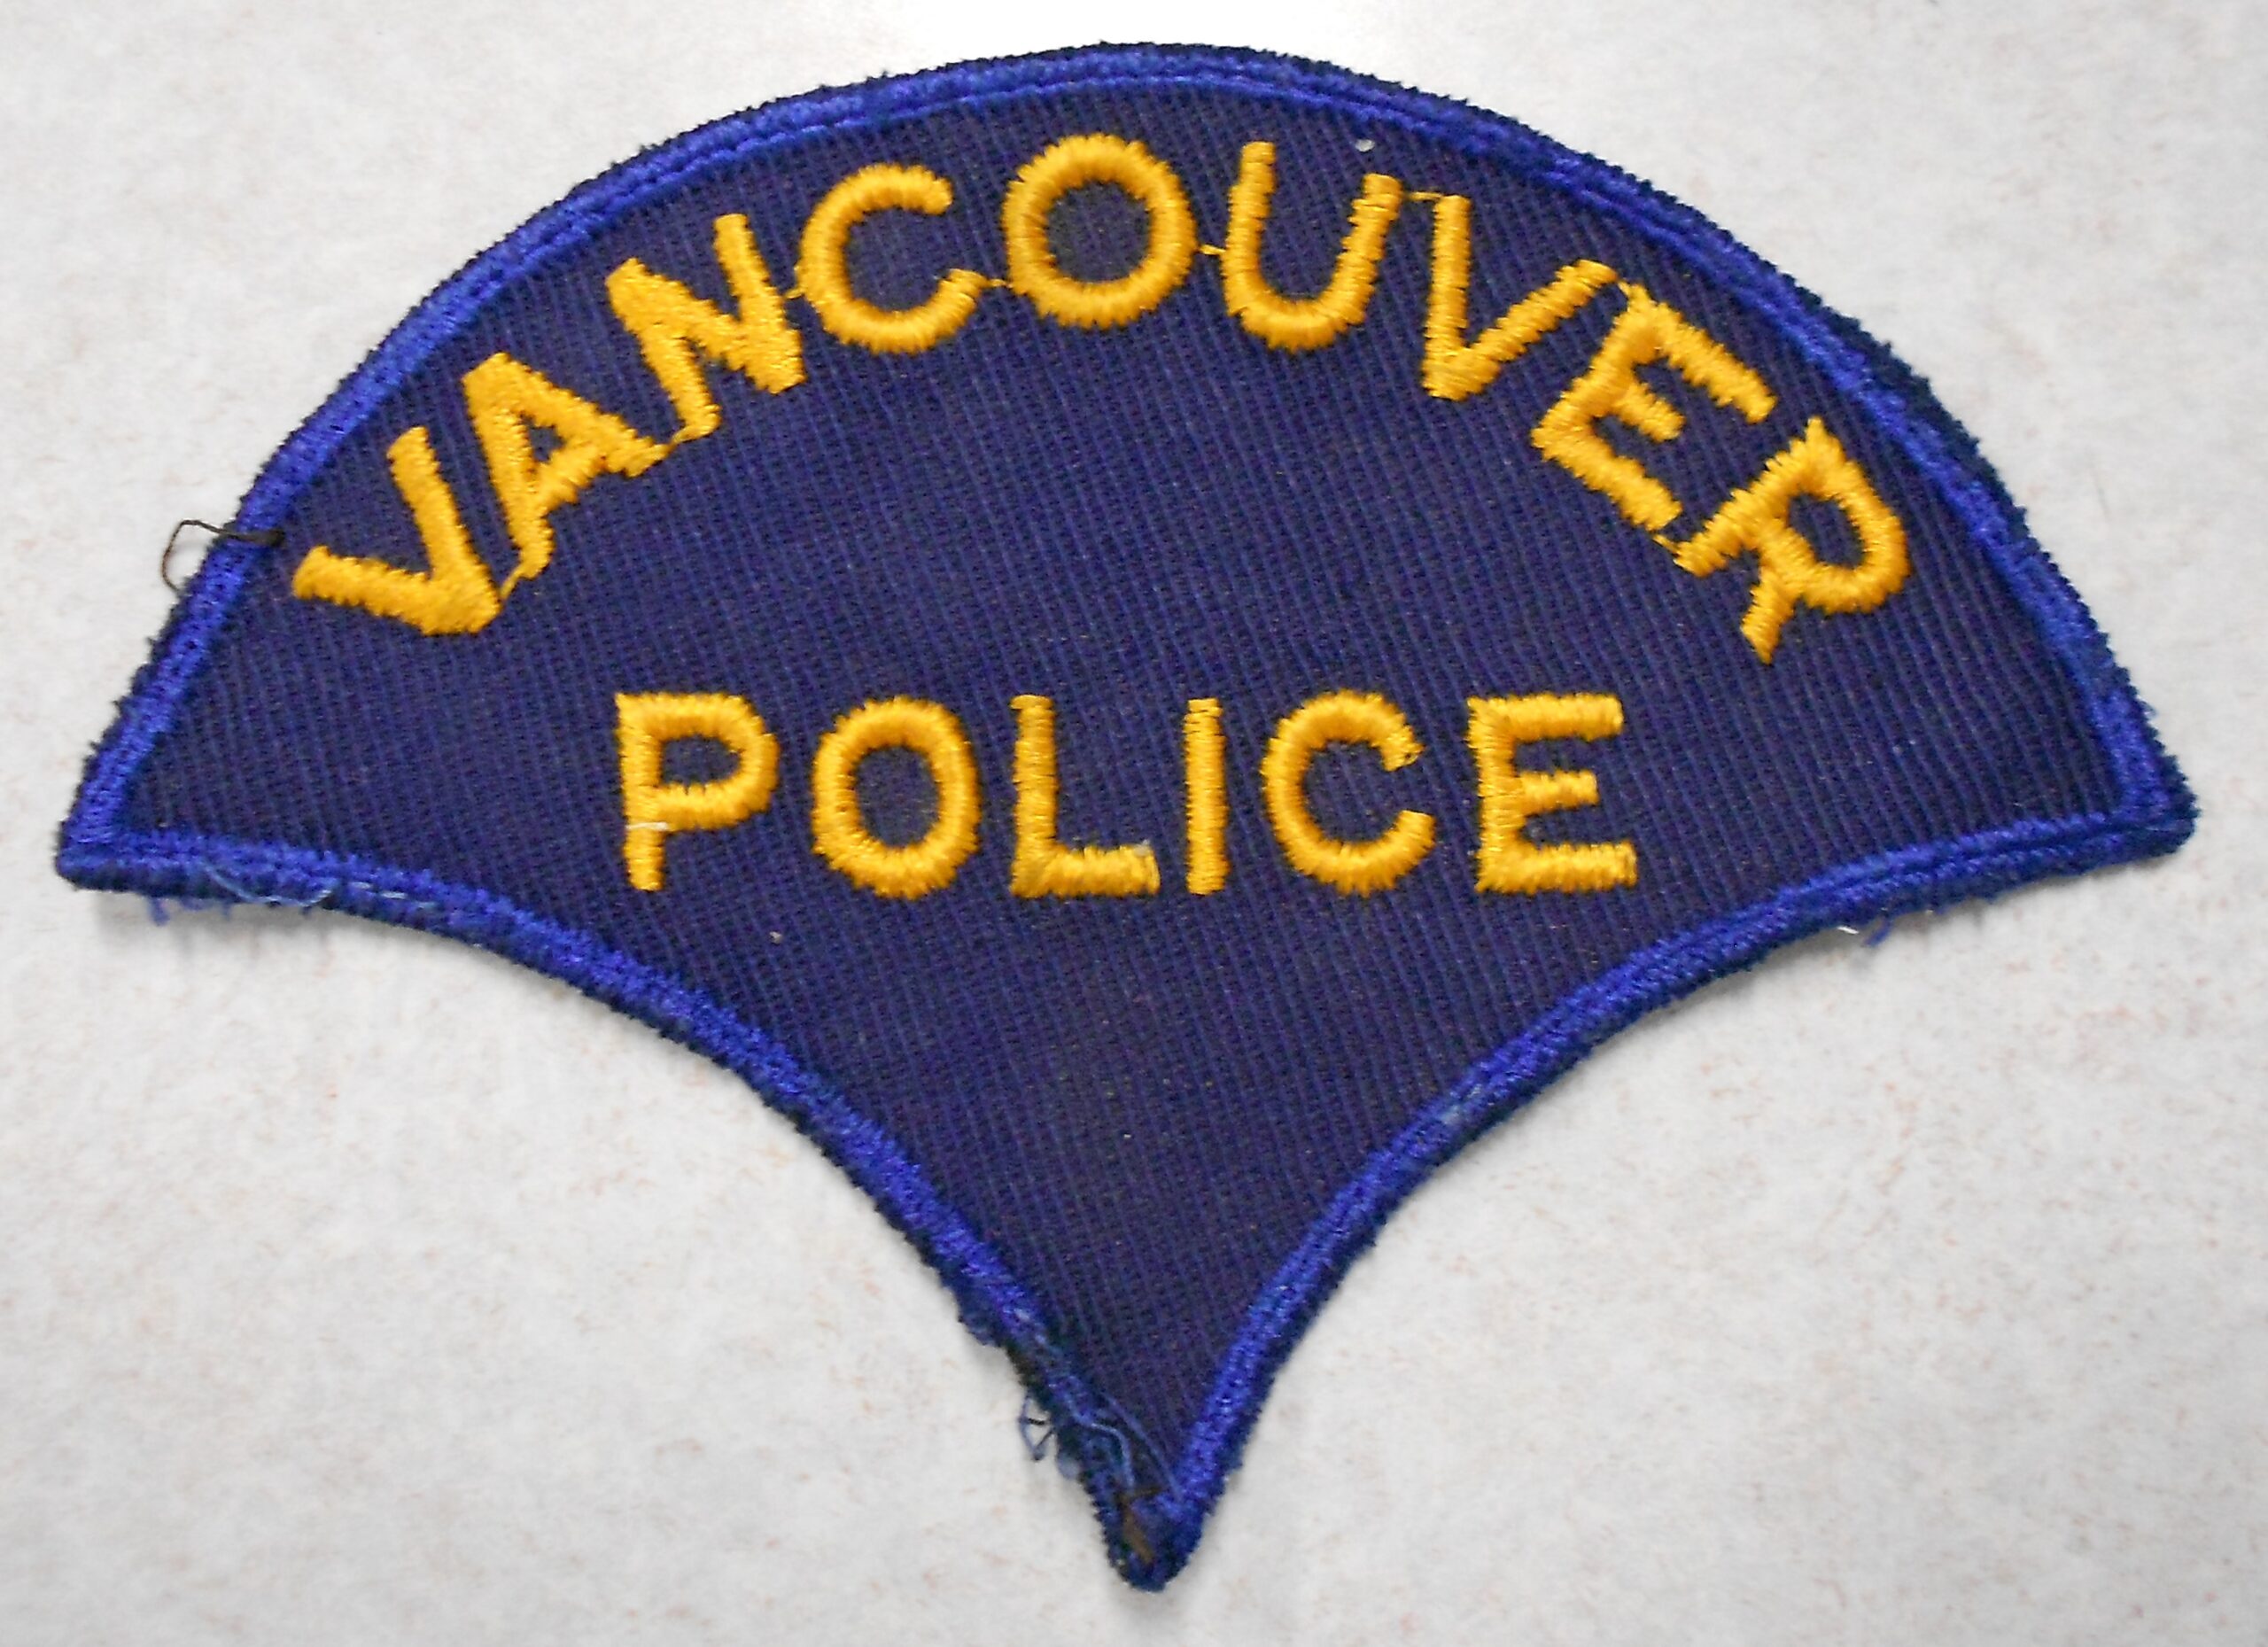 Old blue vancouver police badge